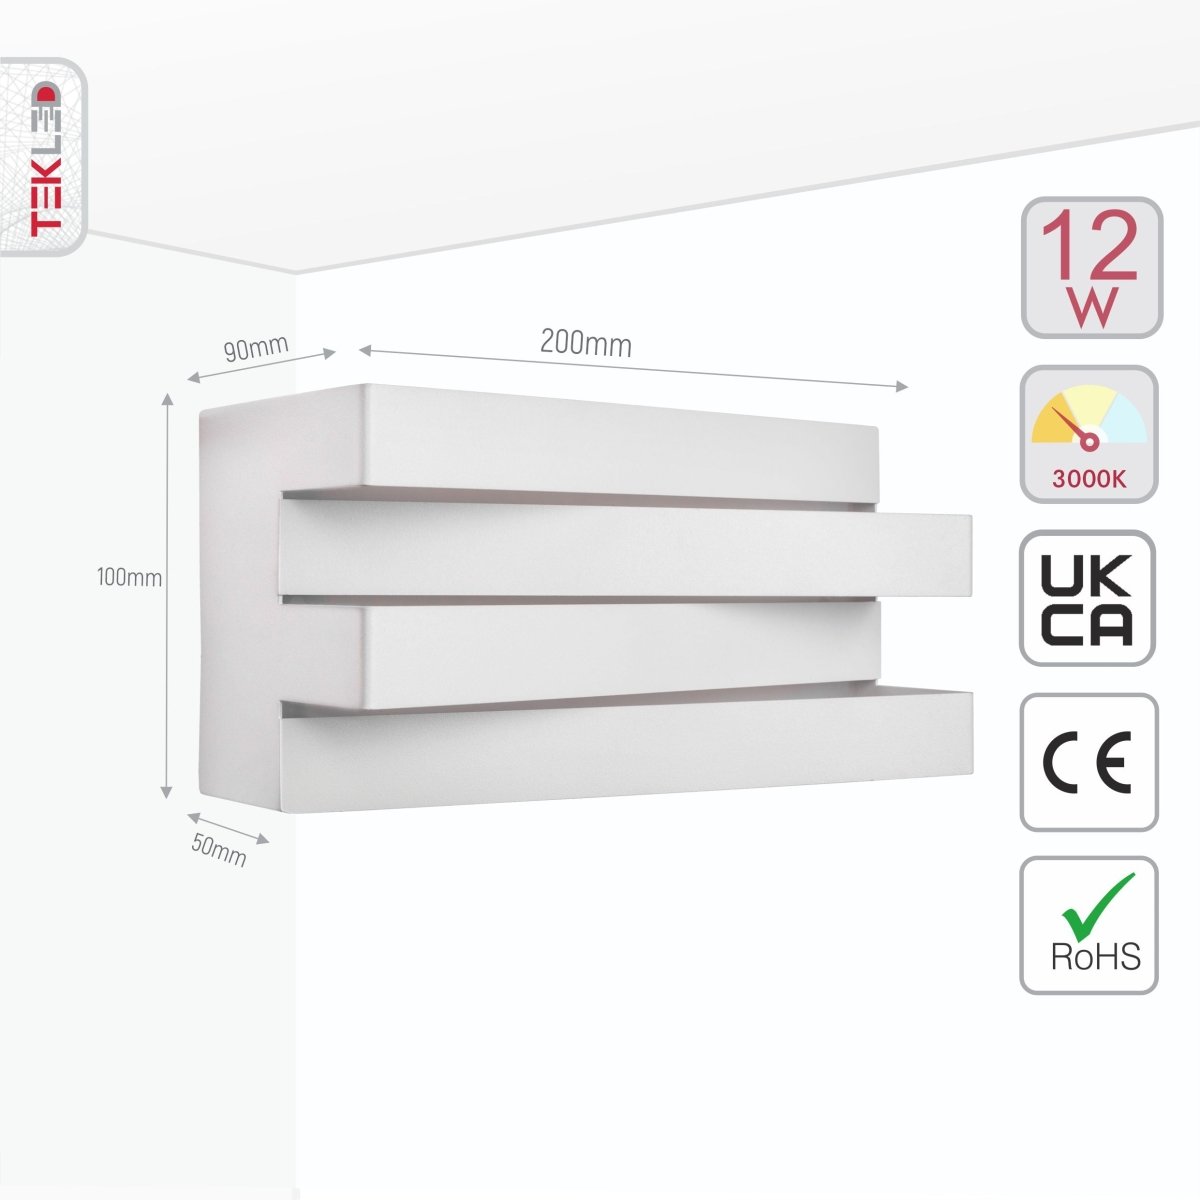 Size and specs of LED White Metal Wall Light 12W Warm White 3000K | TEKLED 151-19536